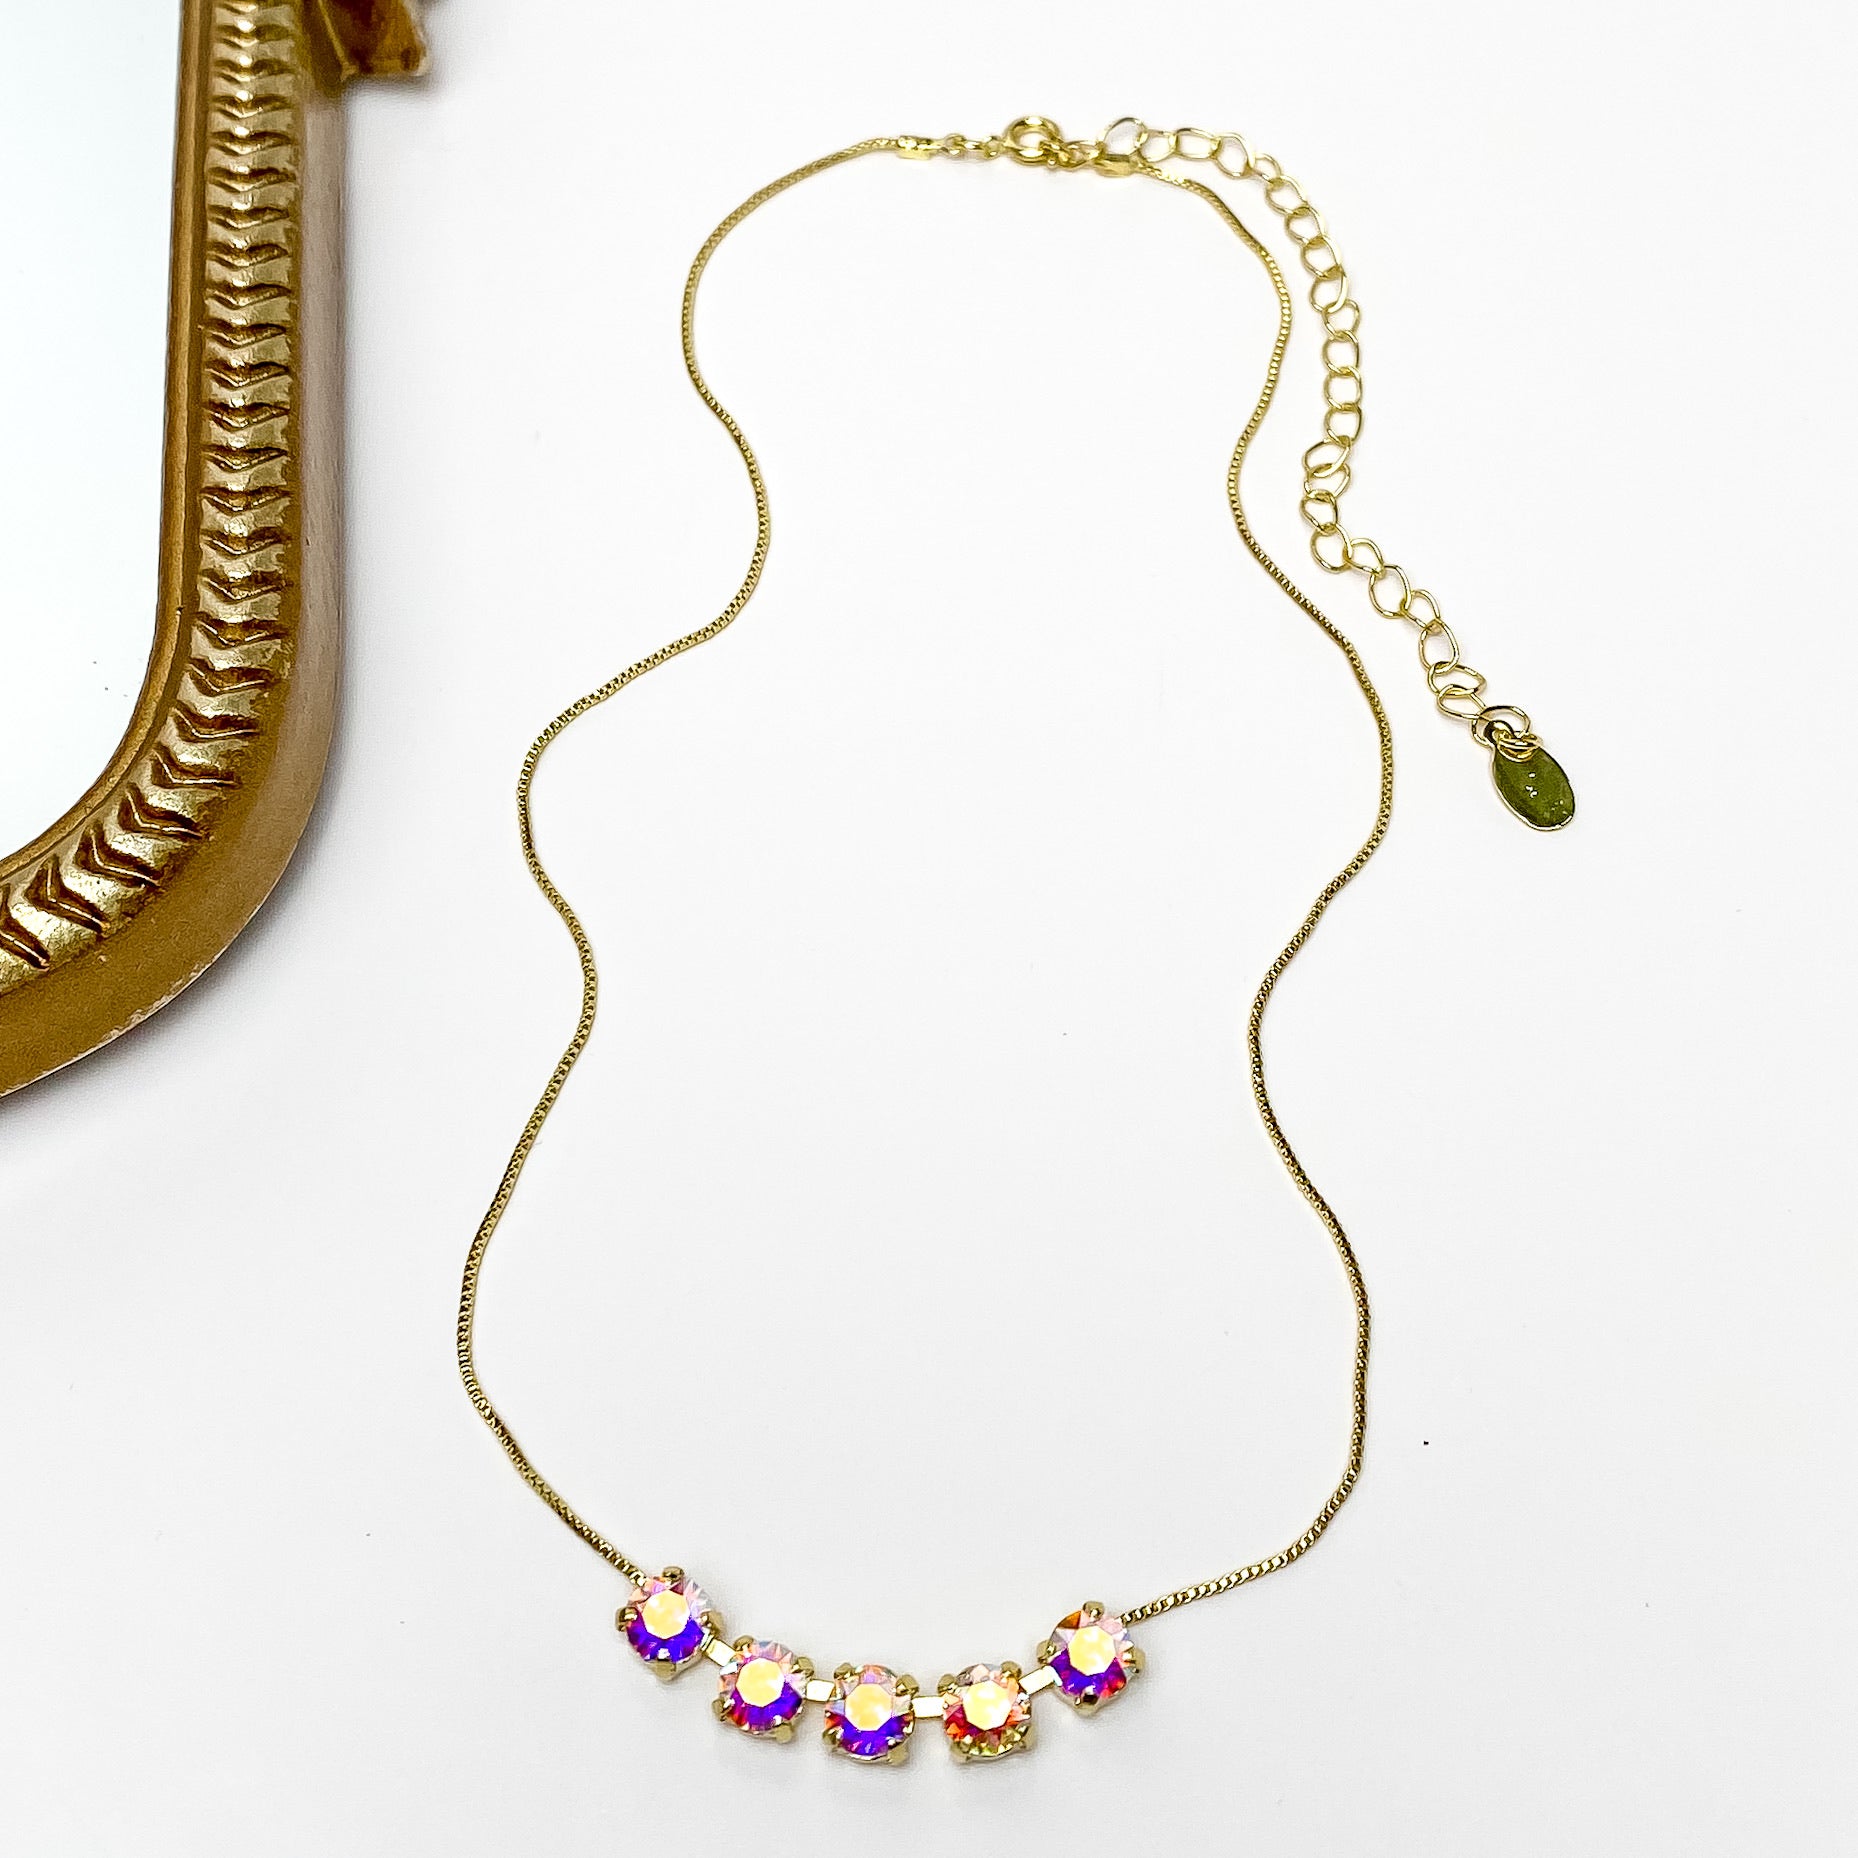 Pictured is a gold necklace with a five ab crystals. This necklace is pictured on a white background with a gold mirror on the left side.